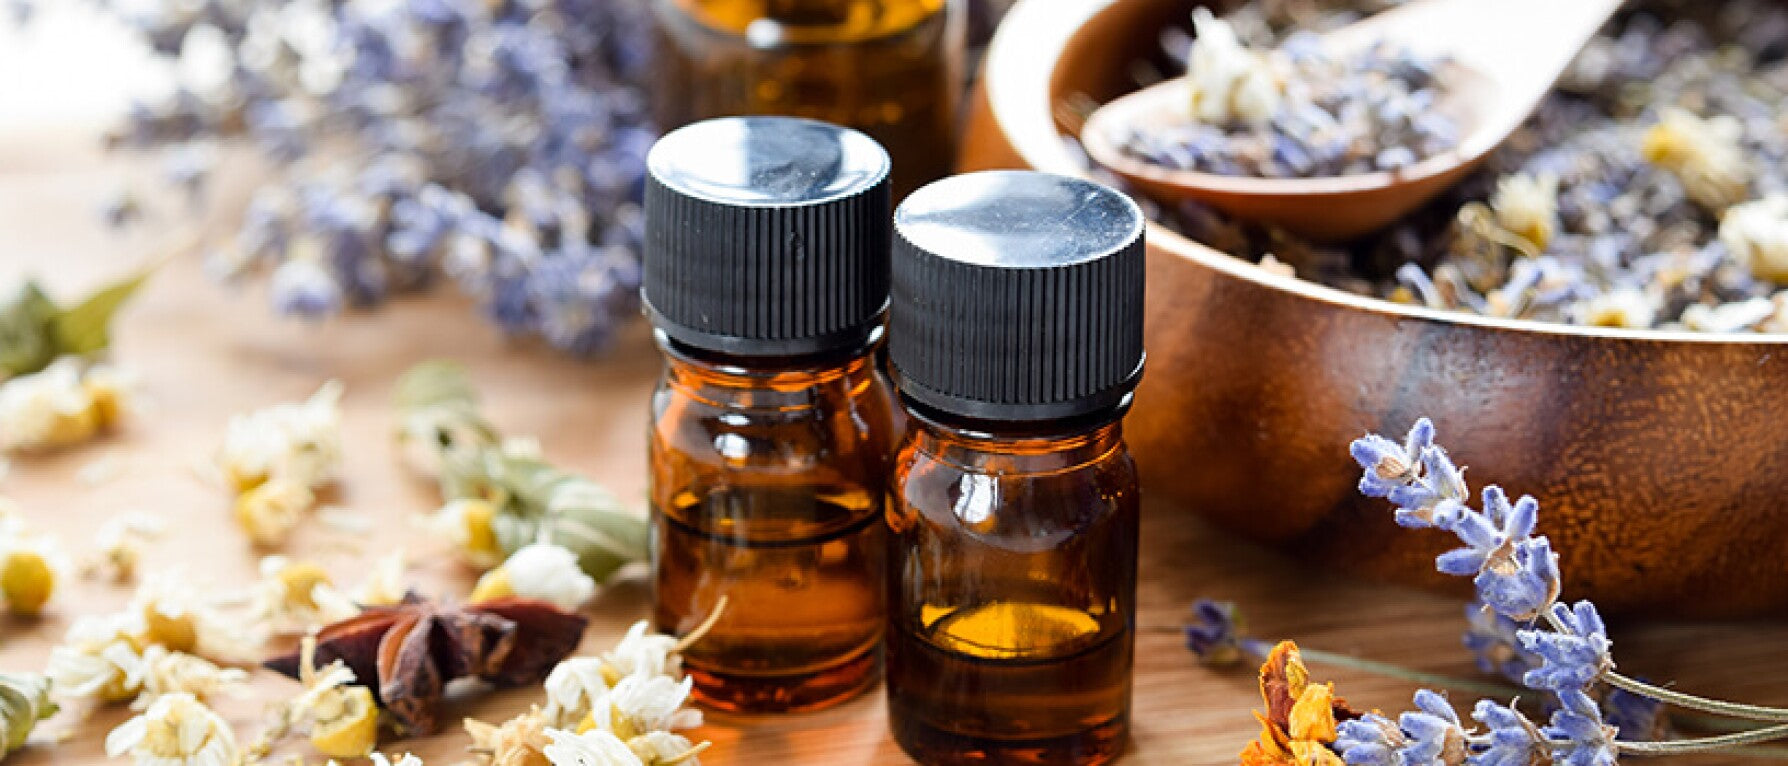 7 Ultra-Powerful Essential Oil Recipes To Boost Your Immune System Thi